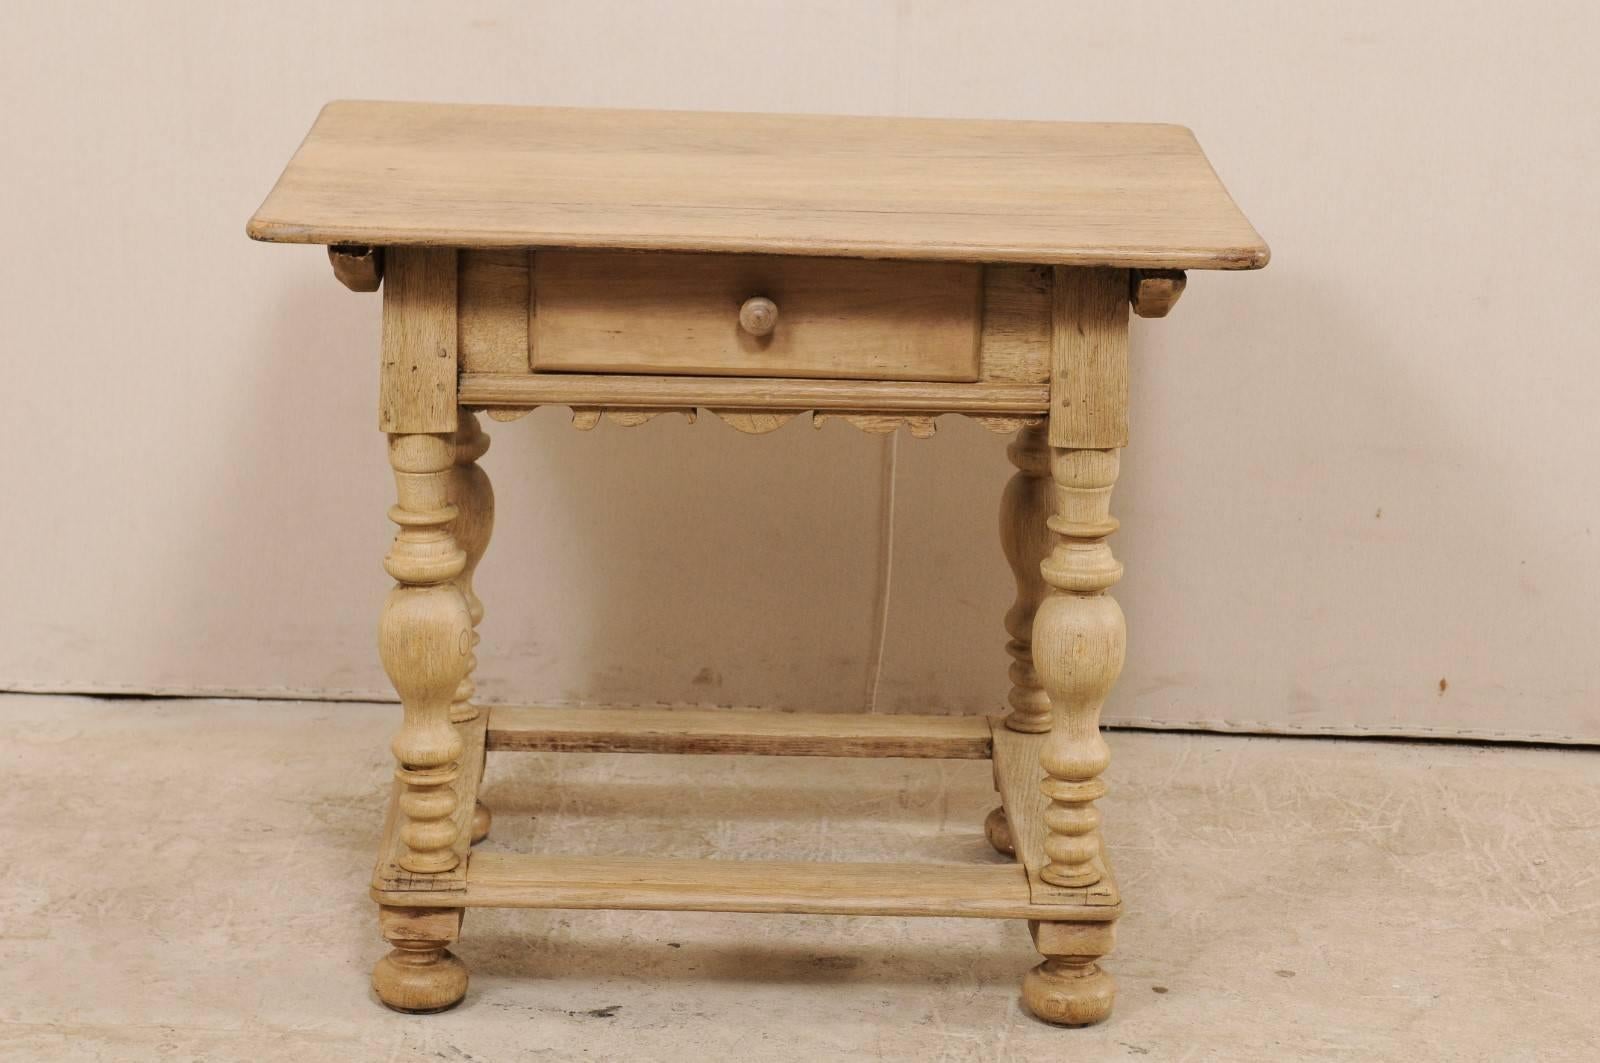 An 18th century Swedish period Baroque wooden side table. This antique Swedish occasional table features an overhanging top with single drawer below, and carved skirt along all sides. The four nicely turned legs, with box stretcher, each terminate